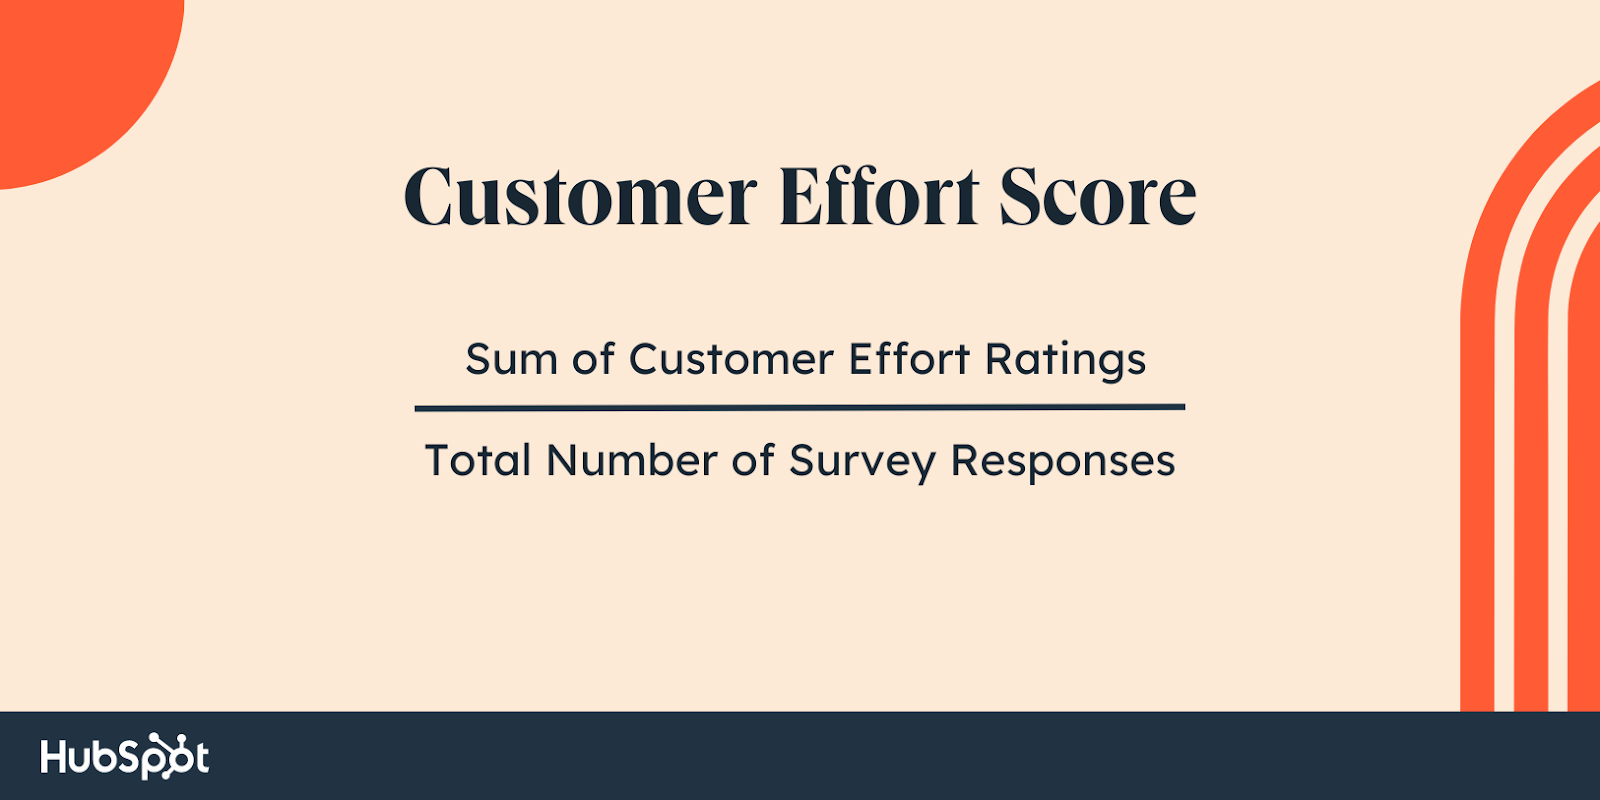 Your organization’s Customer Effort Score measures how hard it is for customers to get the help and support they need.